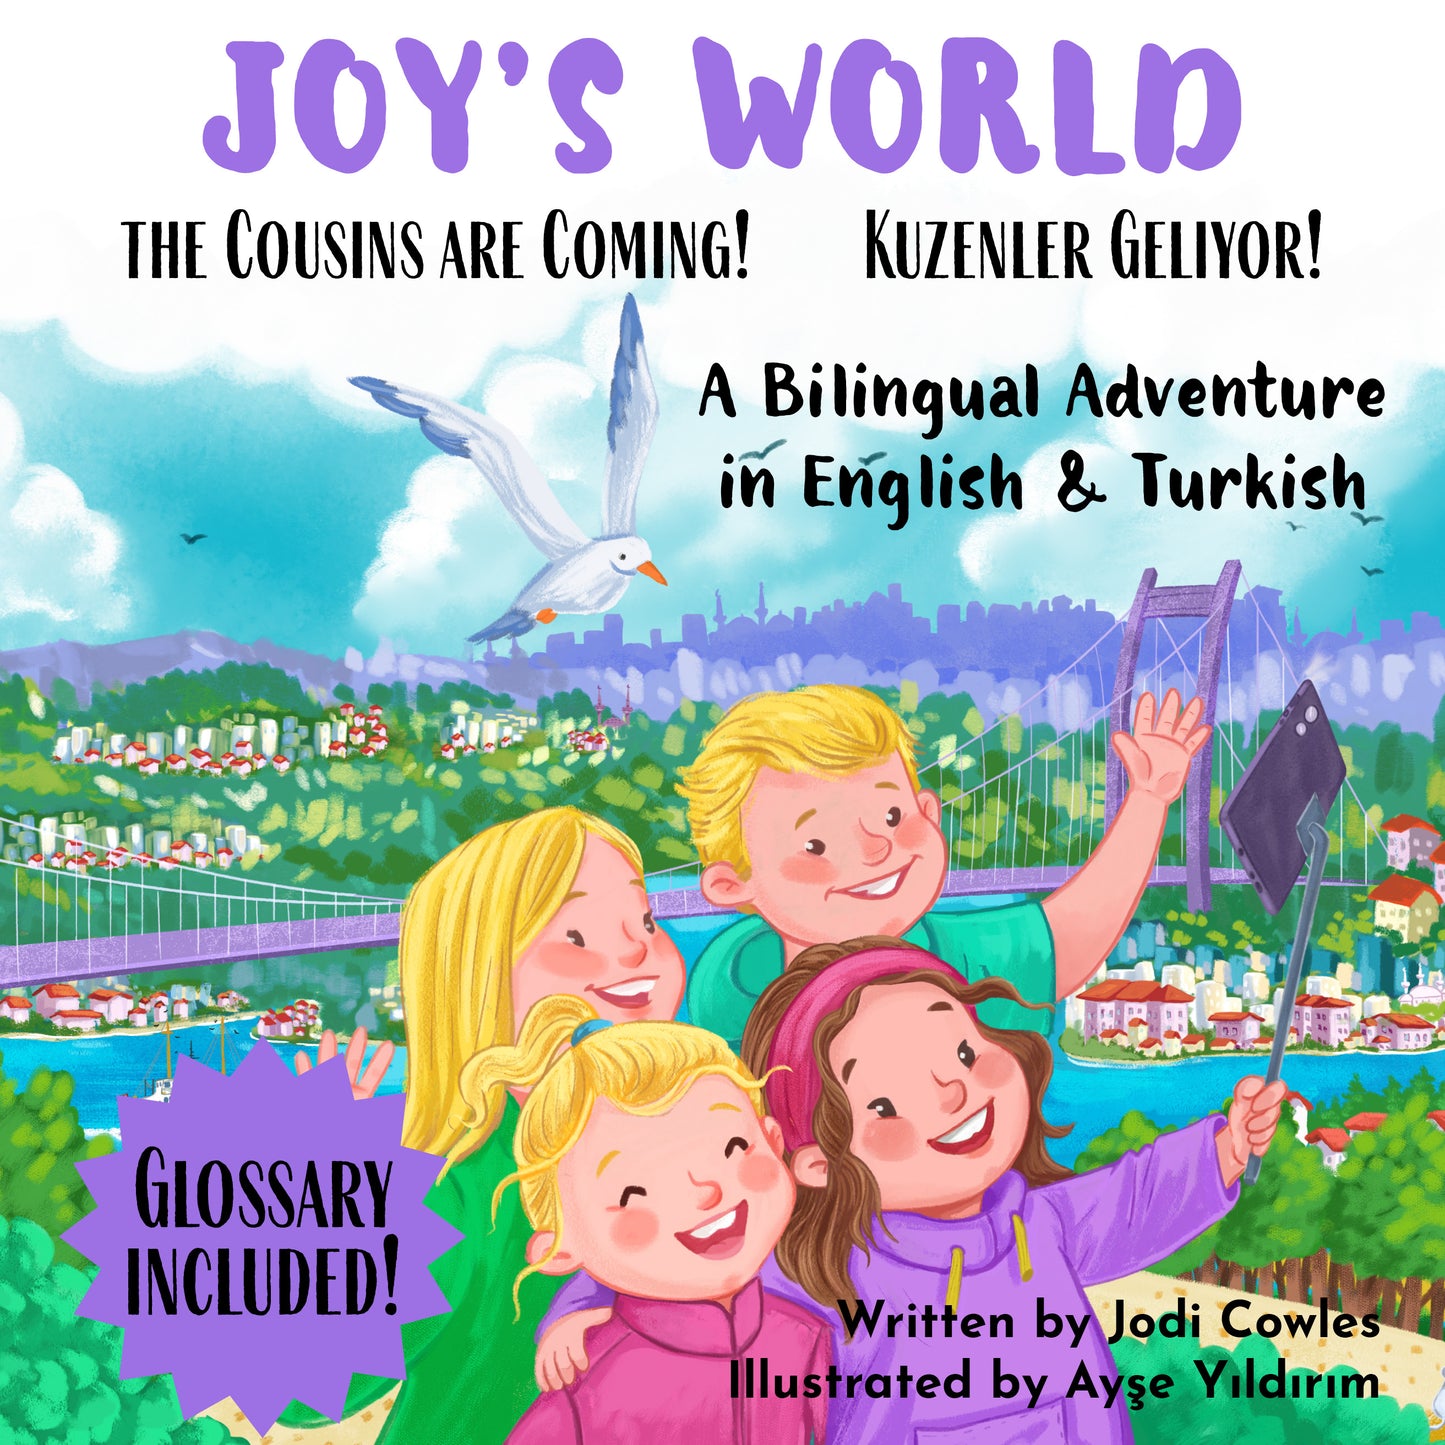 Joy's World: The Cousins Are Coming! (Eng/Turk) Paperback